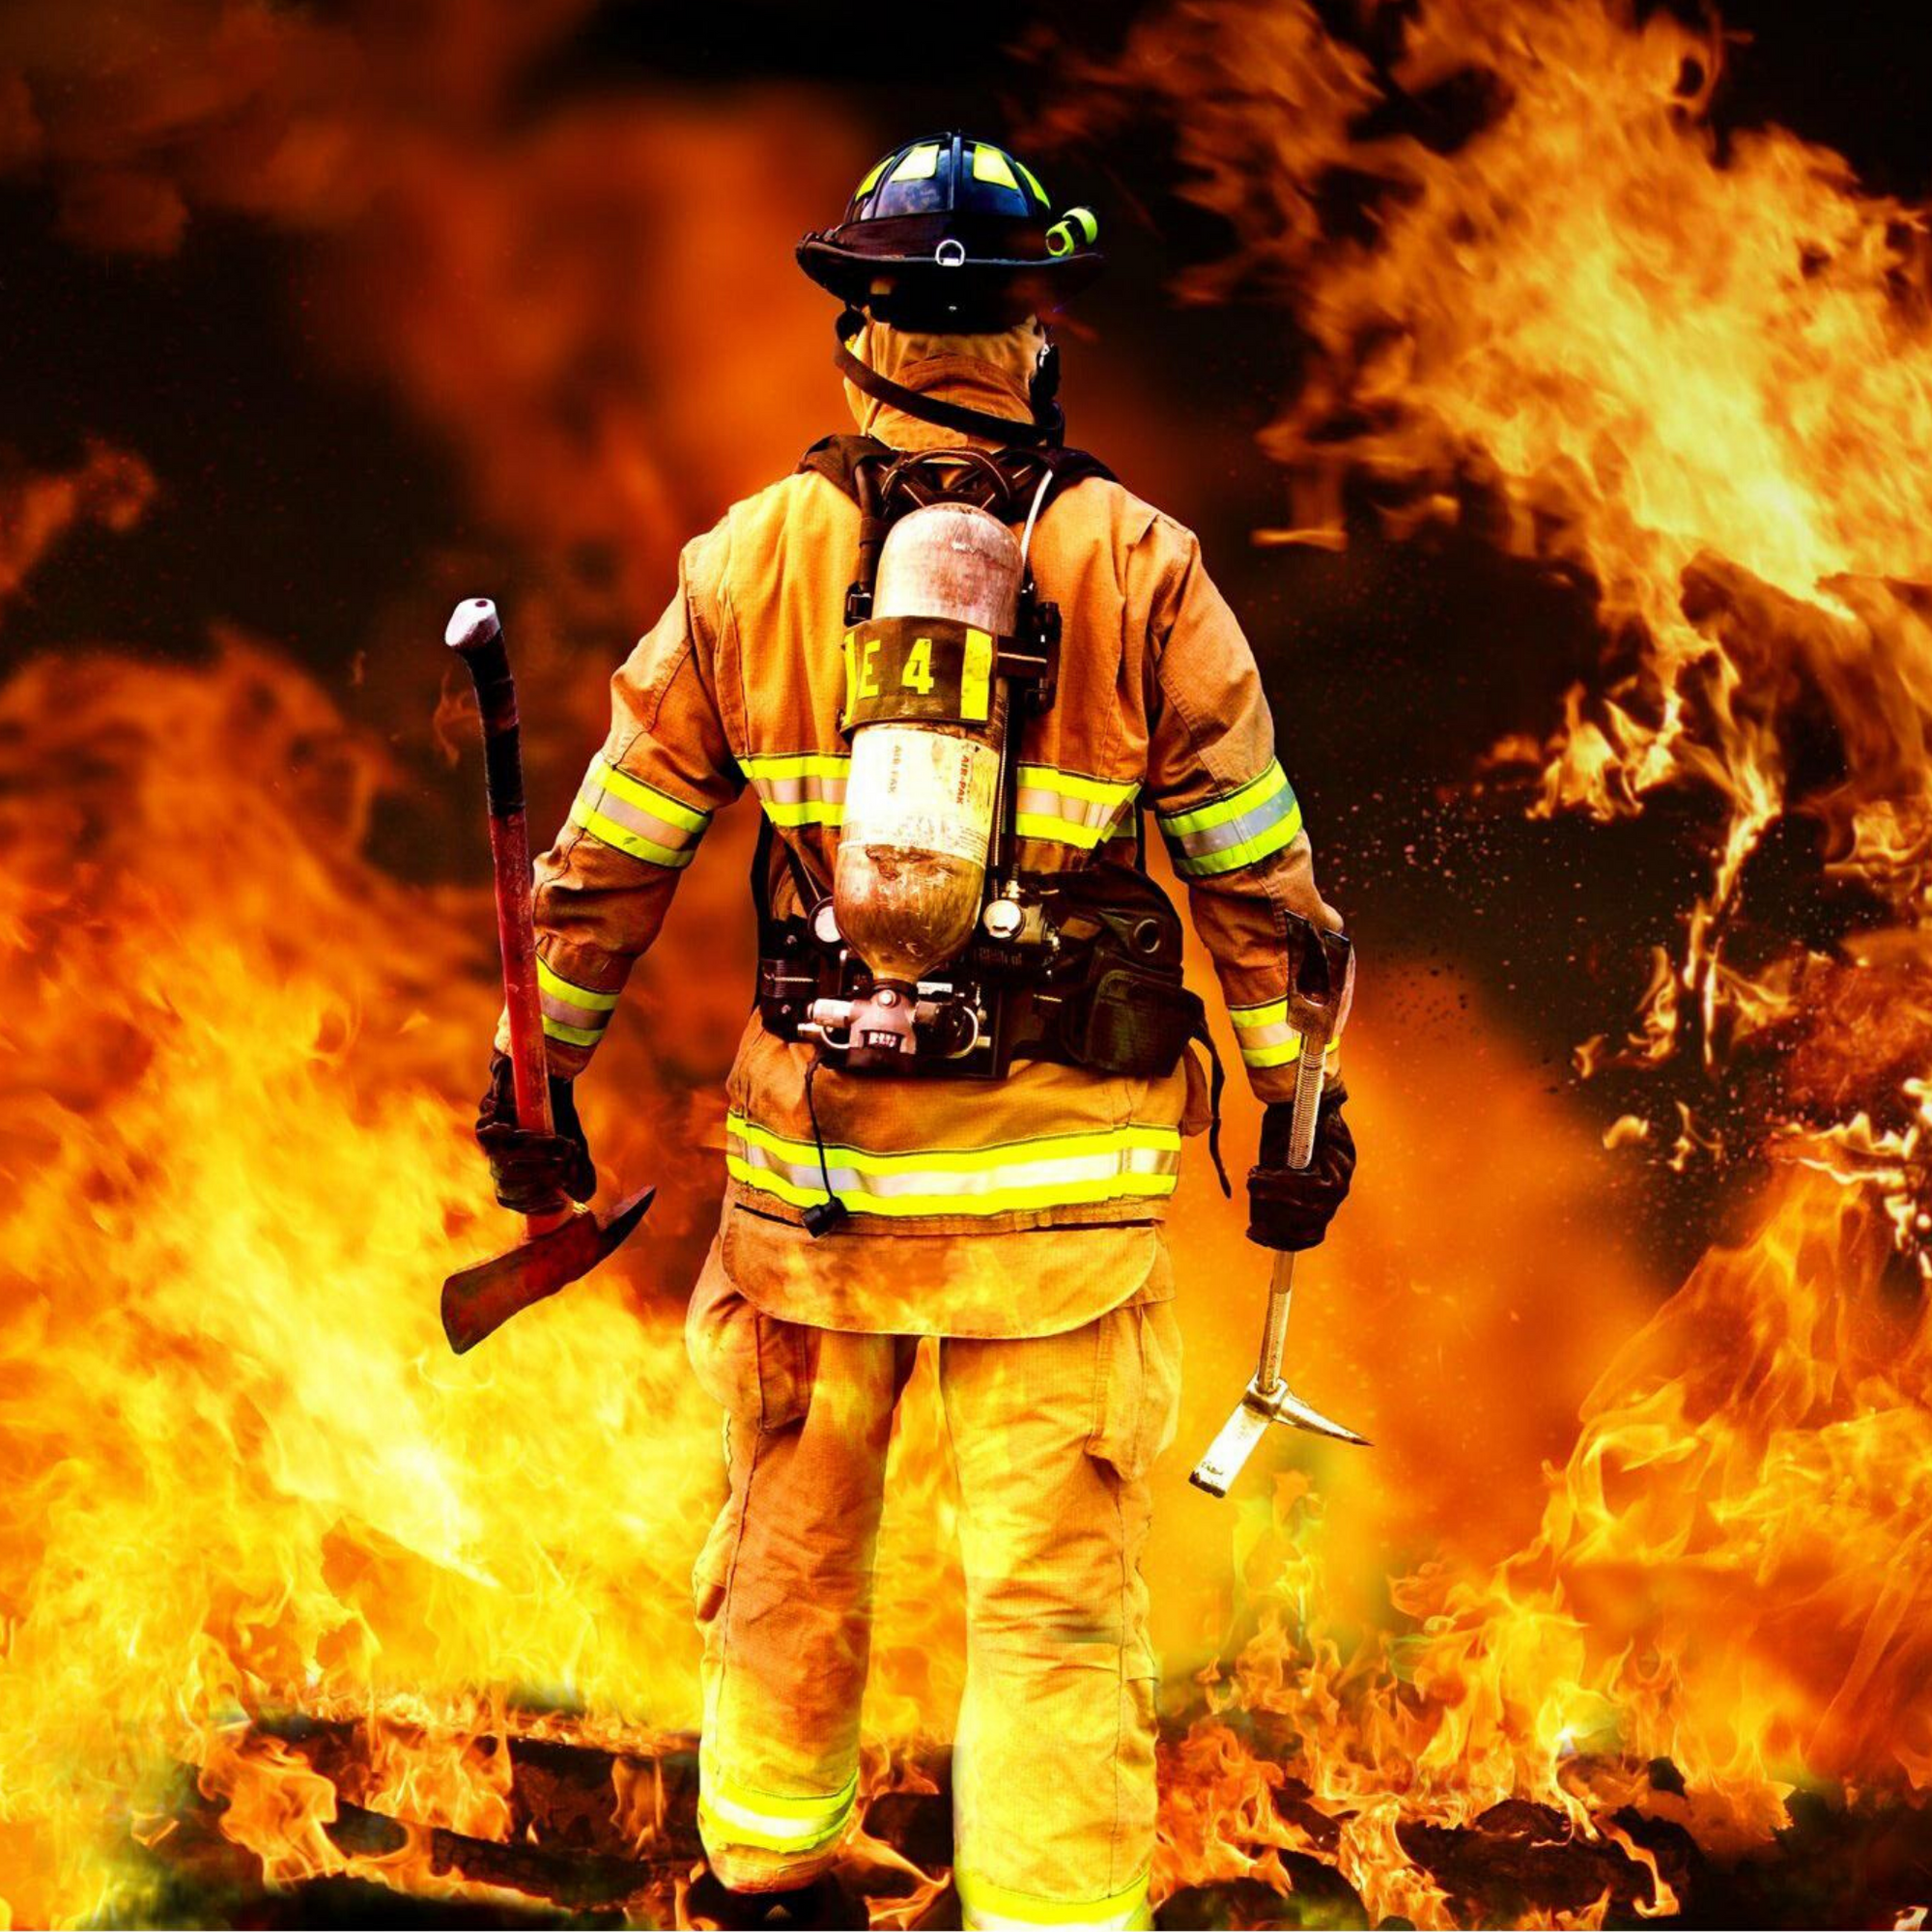 Fireman in front of fire